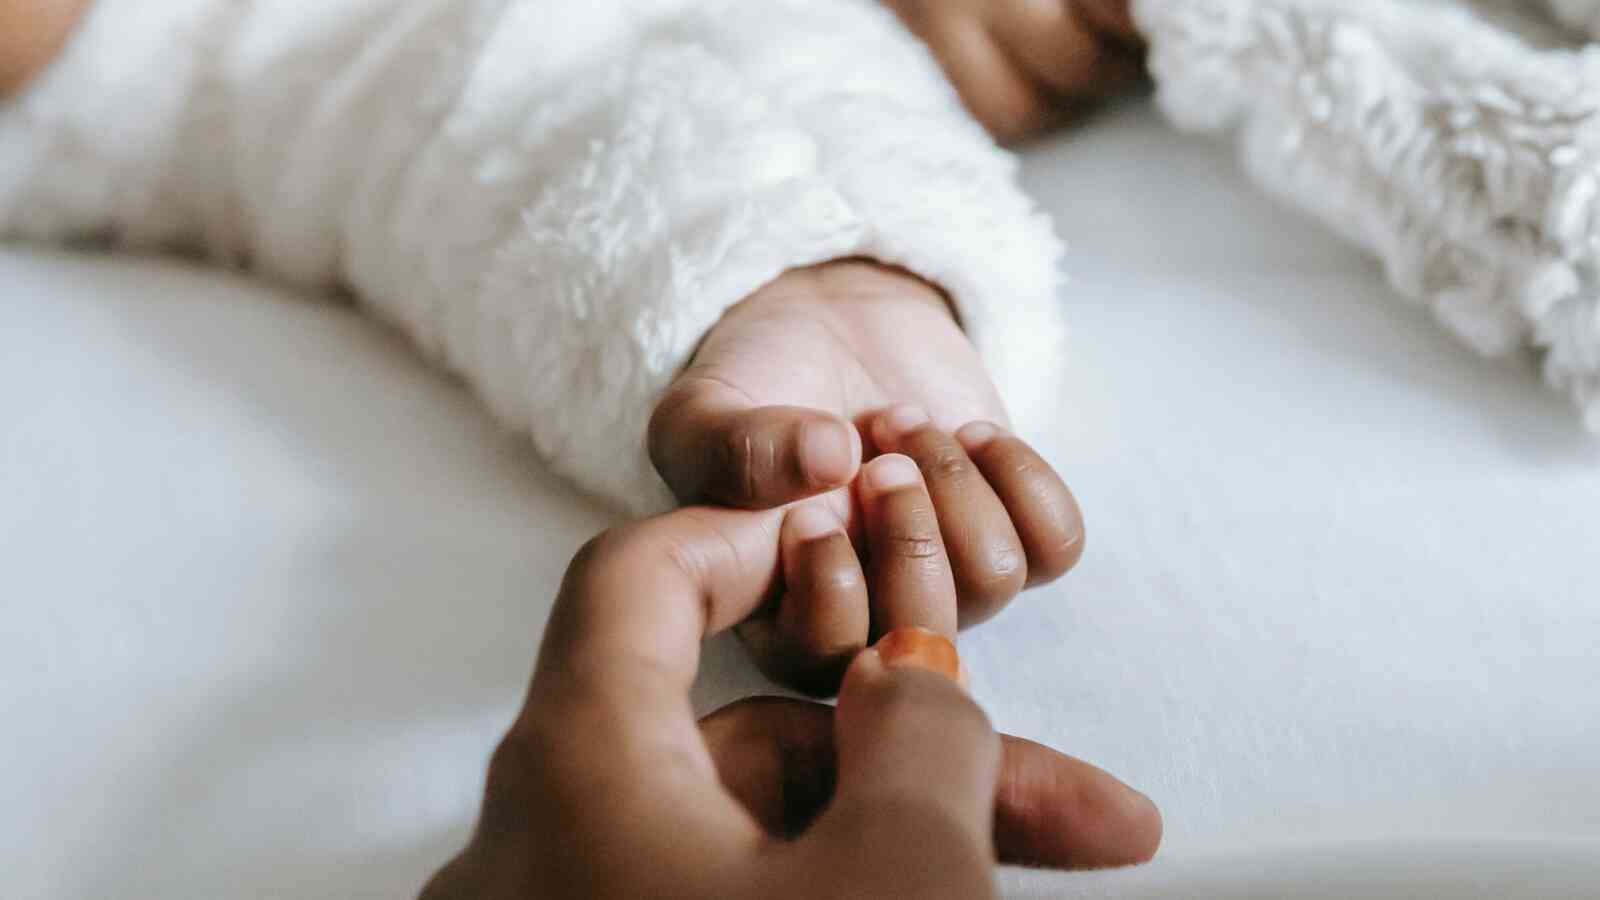 Caregiver reaching out to touch a babies hand